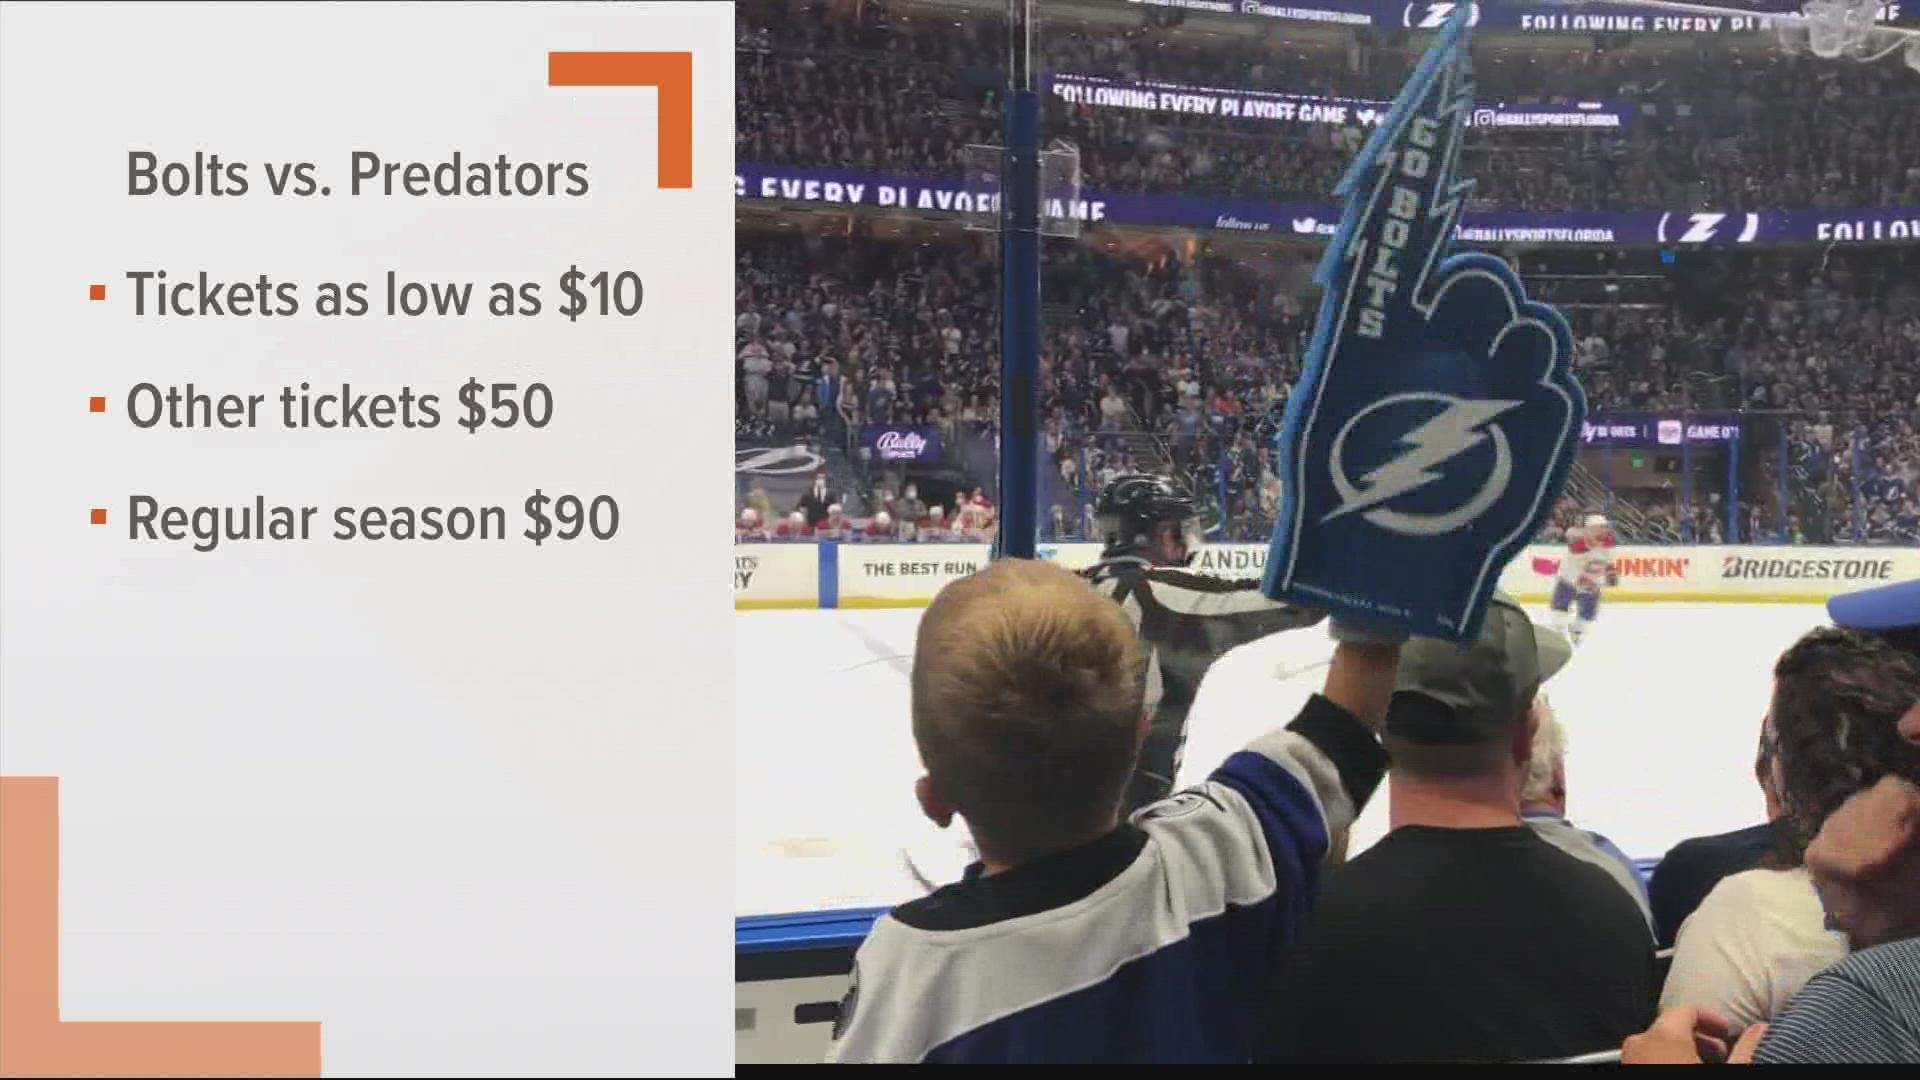 The preseason is a great time to see a back-to-back Stanley Cup winning team for just $10 a ticket.